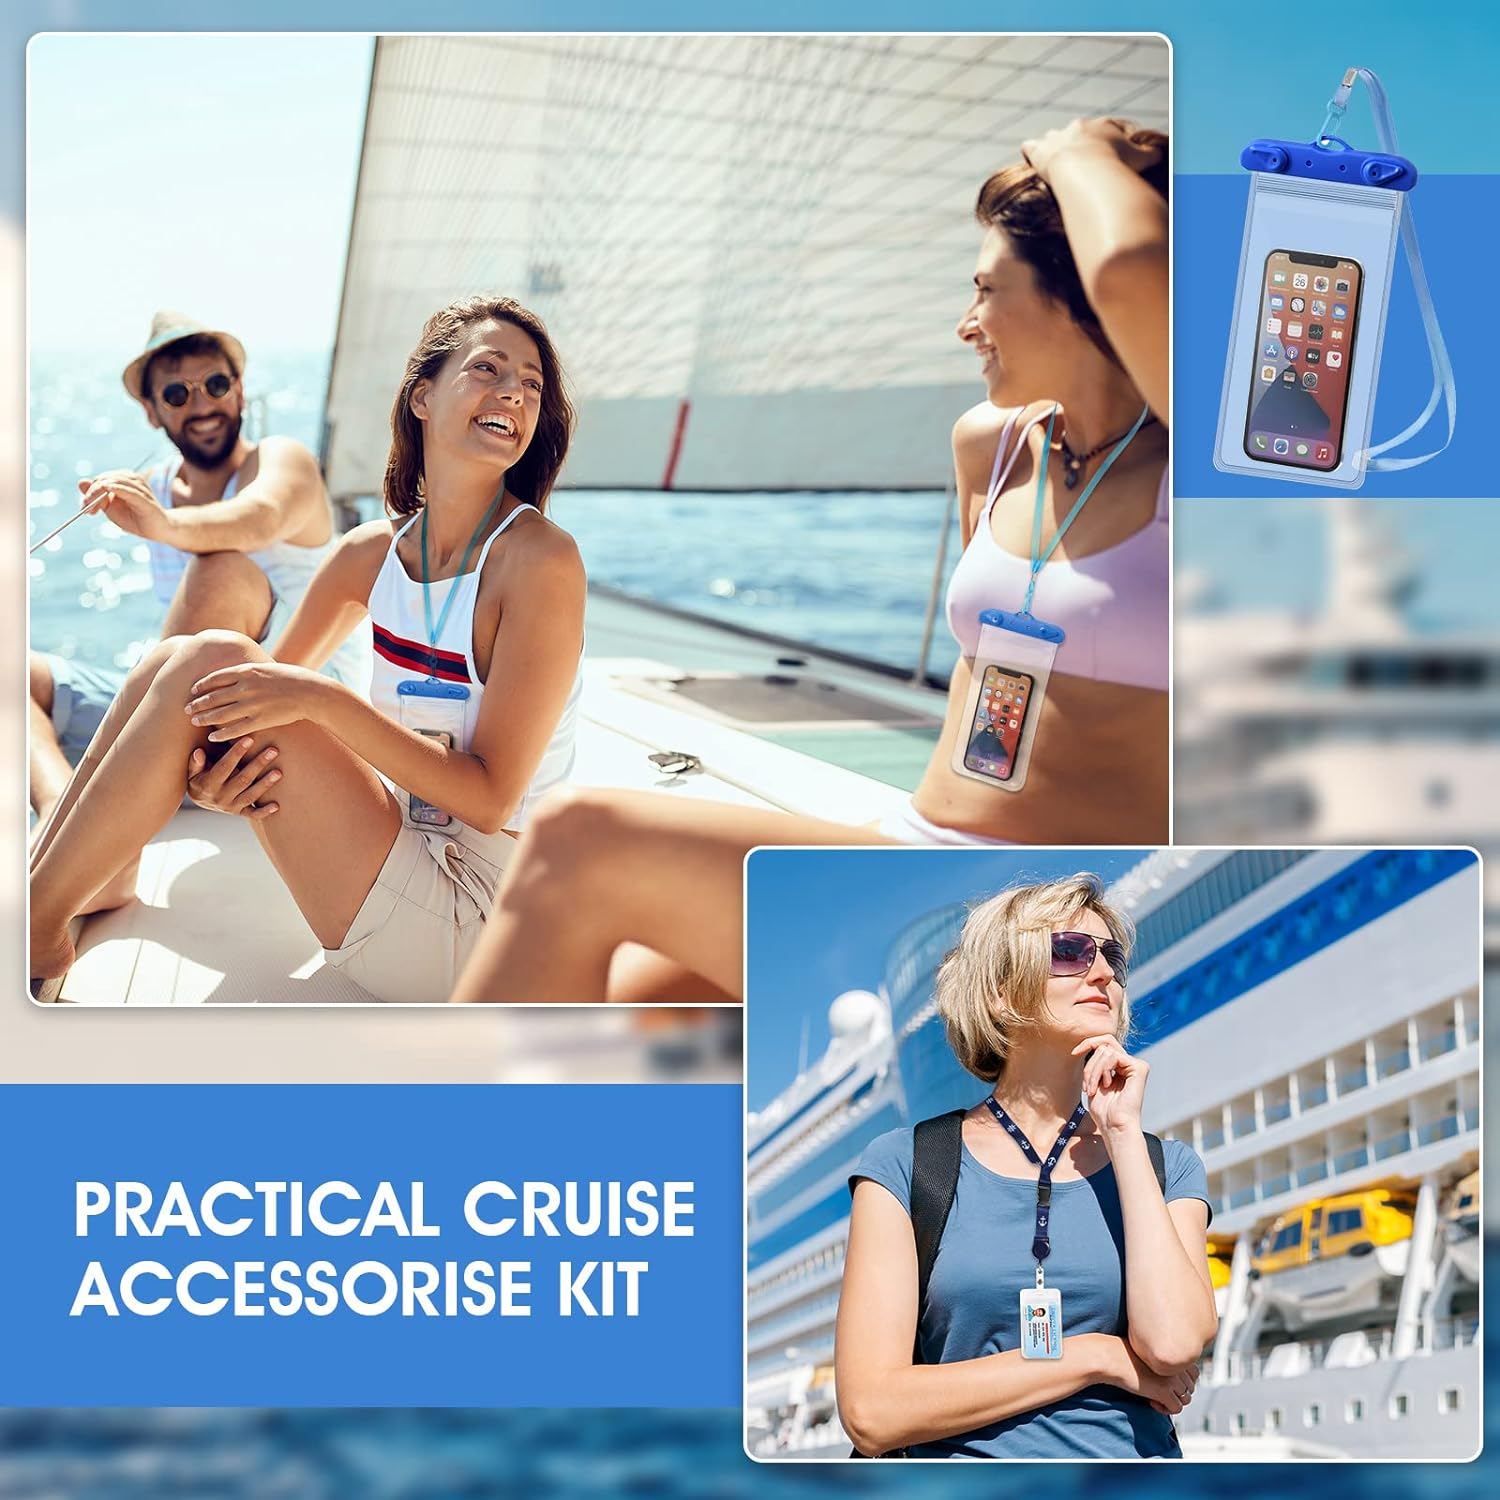 24 Pcs Cruise Accessories Kit Includes Clear Carnival Cruise Luggage Tags with Metal Loop and Cruise Lanyards for Ship Cards with ID Holder Drink Bags with Funnel Cruise Power Strip Phone Pouch